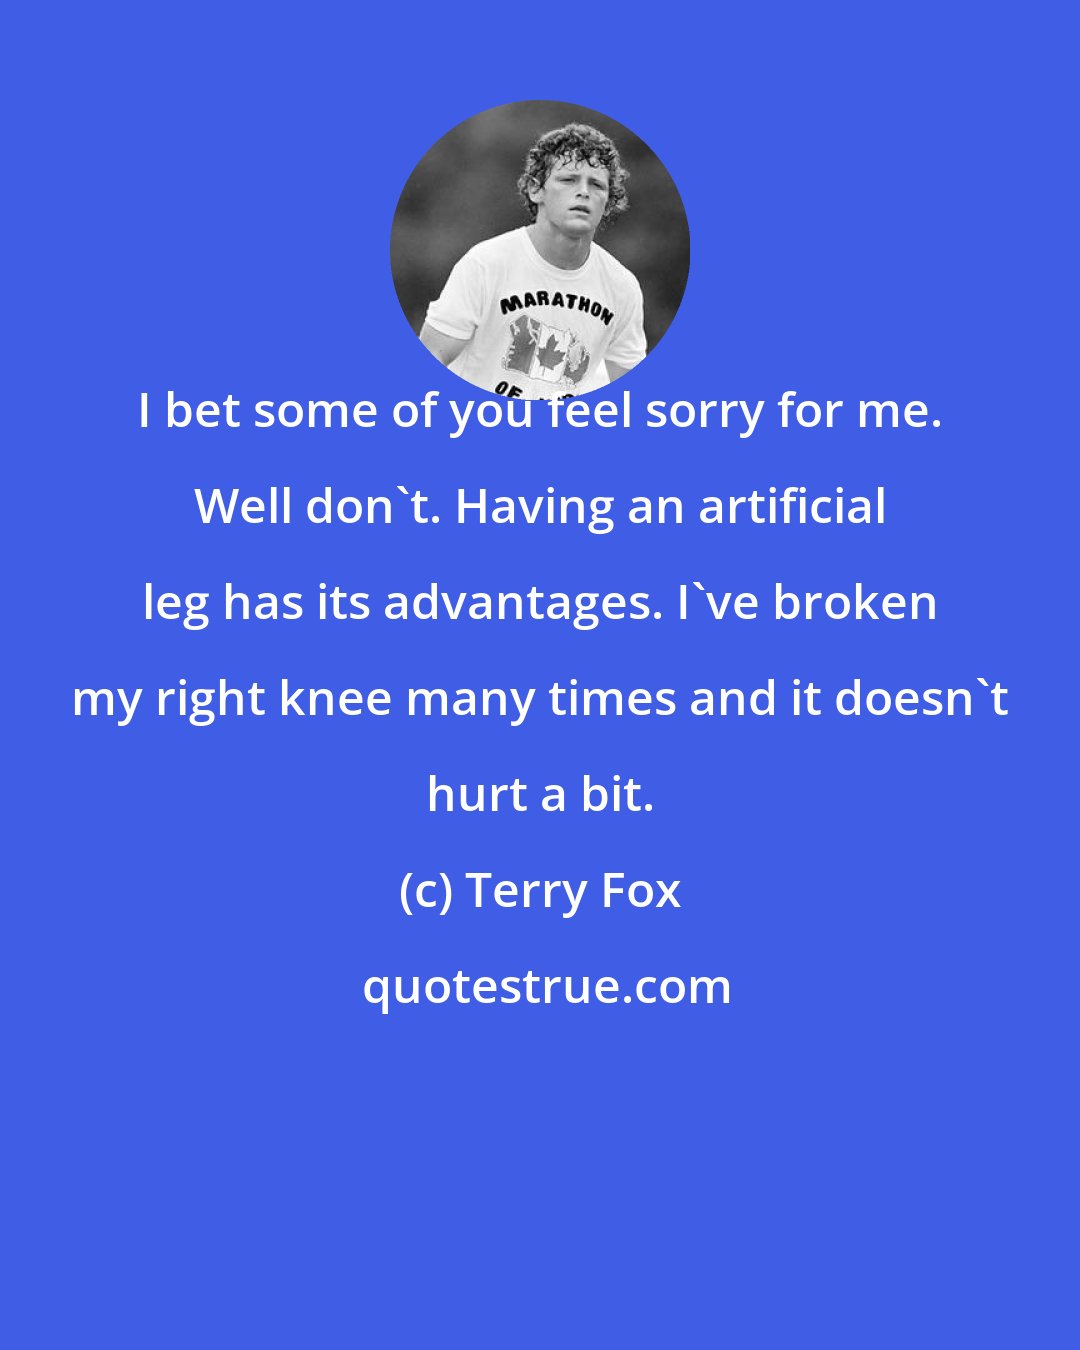 Terry Fox: I bet some of you feel sorry for me. Well don't. Having an artificial leg has its advantages. I've broken my right knee many times and it doesn't hurt a bit.